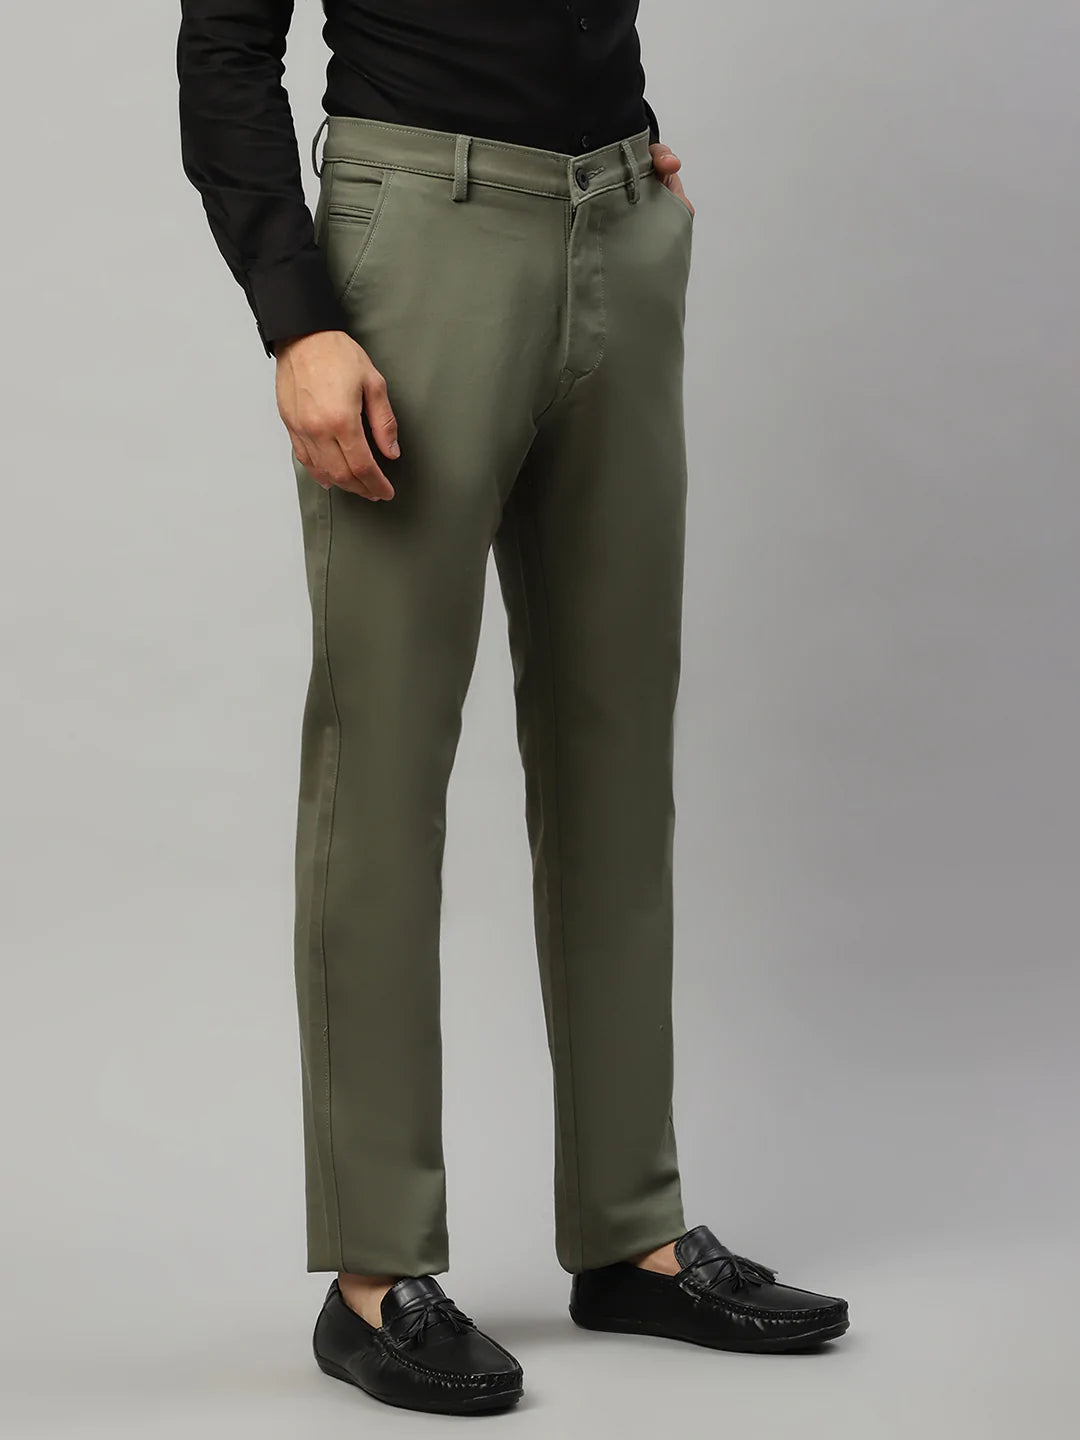 Mens Olive Green Cotton Shirt w Khakee Pants Mix n Match - MainRoad.in